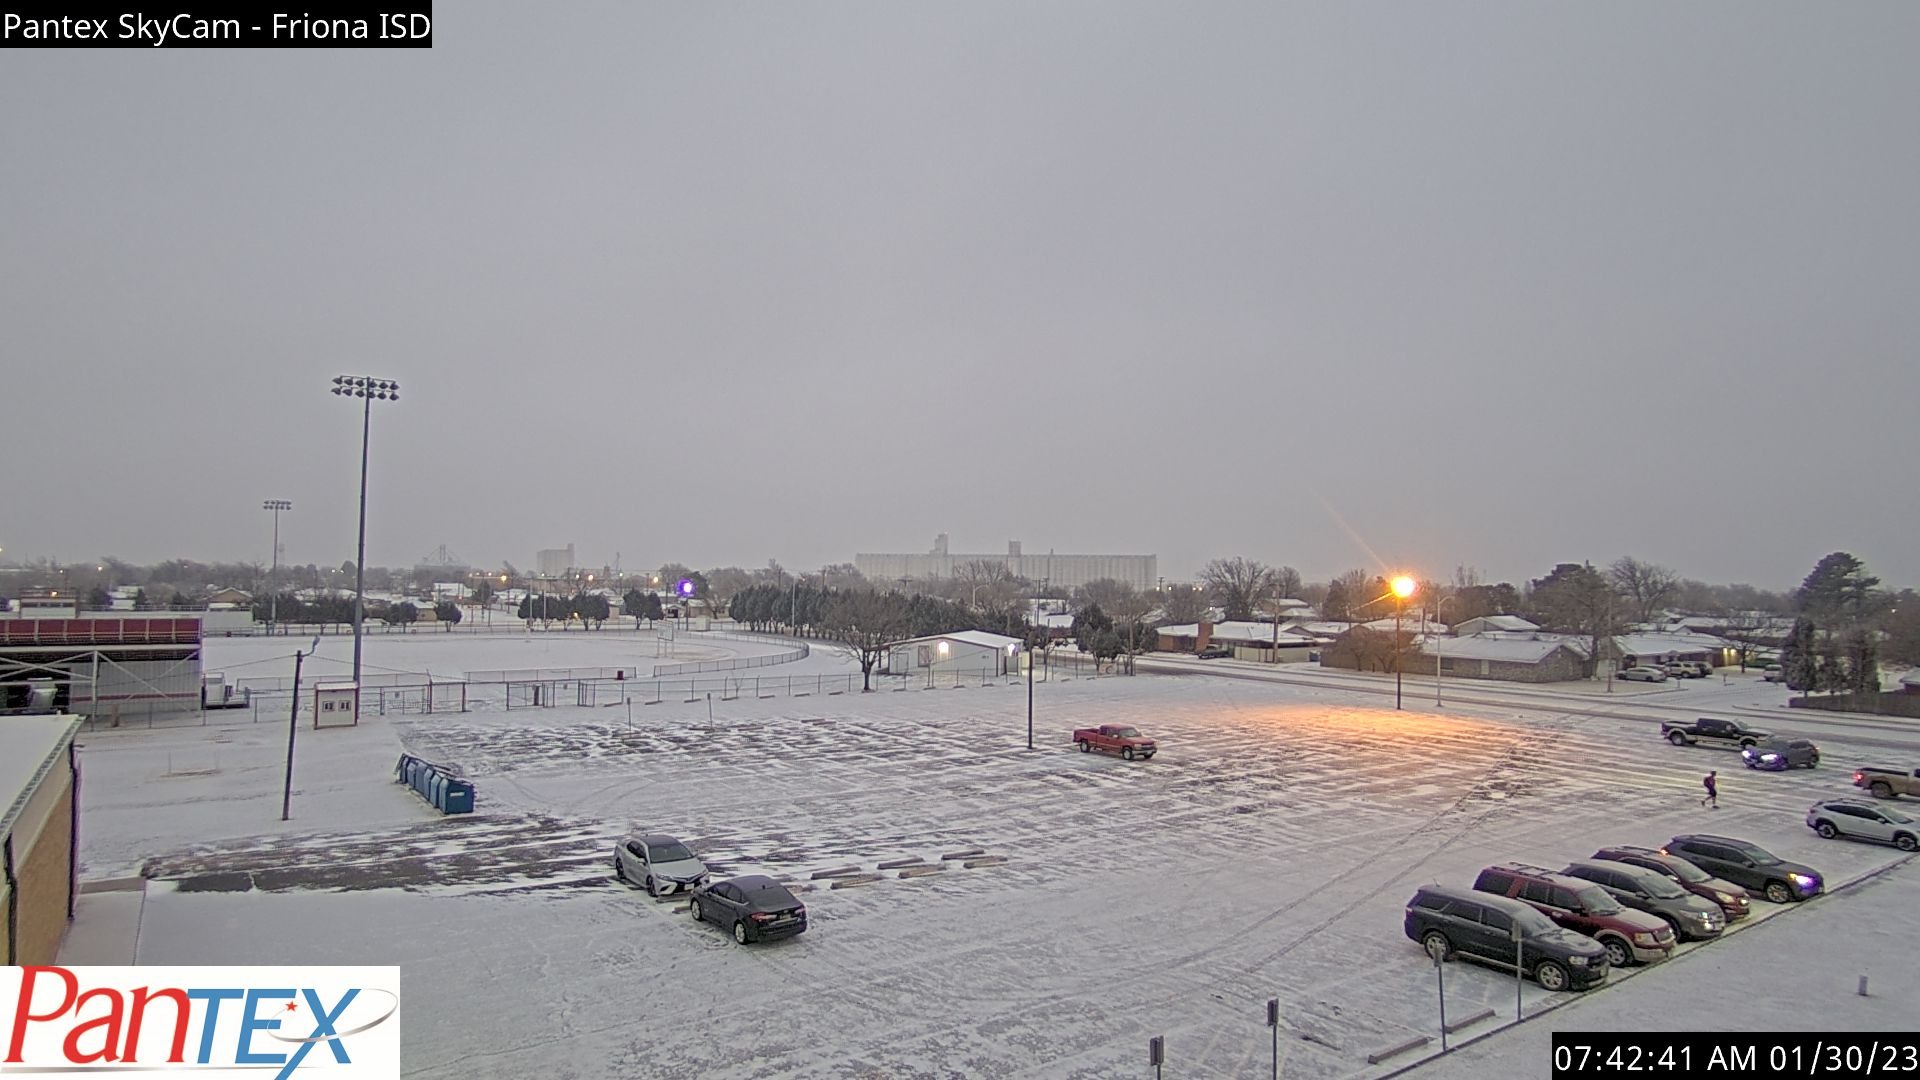 The wintry scene in Friona Monday morning (30 January 2023). The picture is courtesy of Pantex.